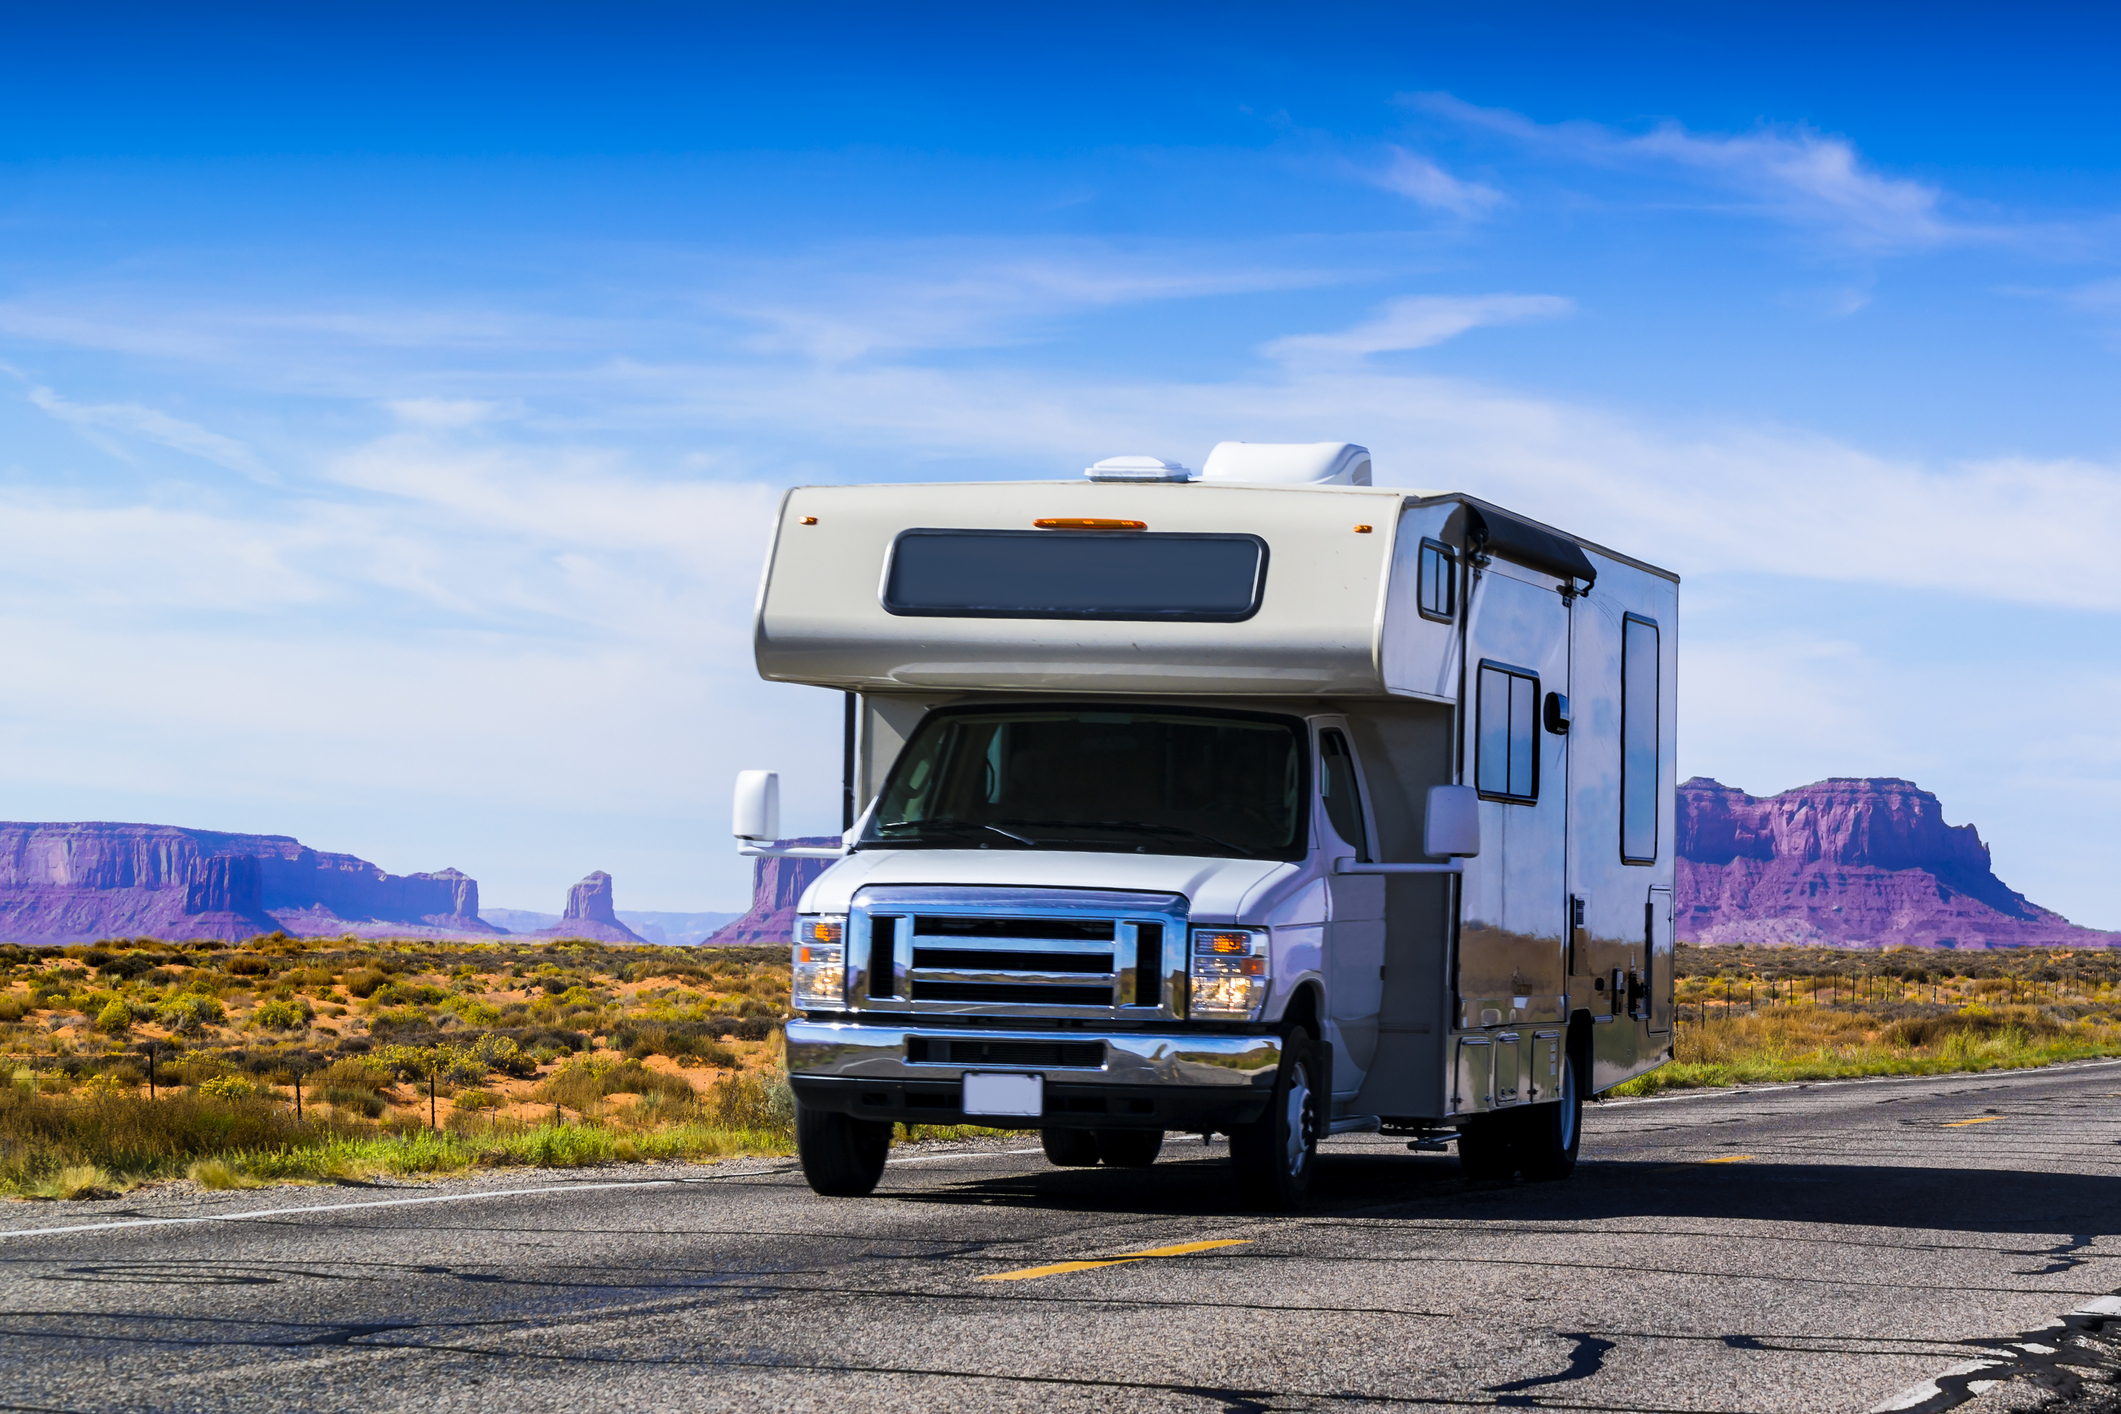 Check with your RV dealer